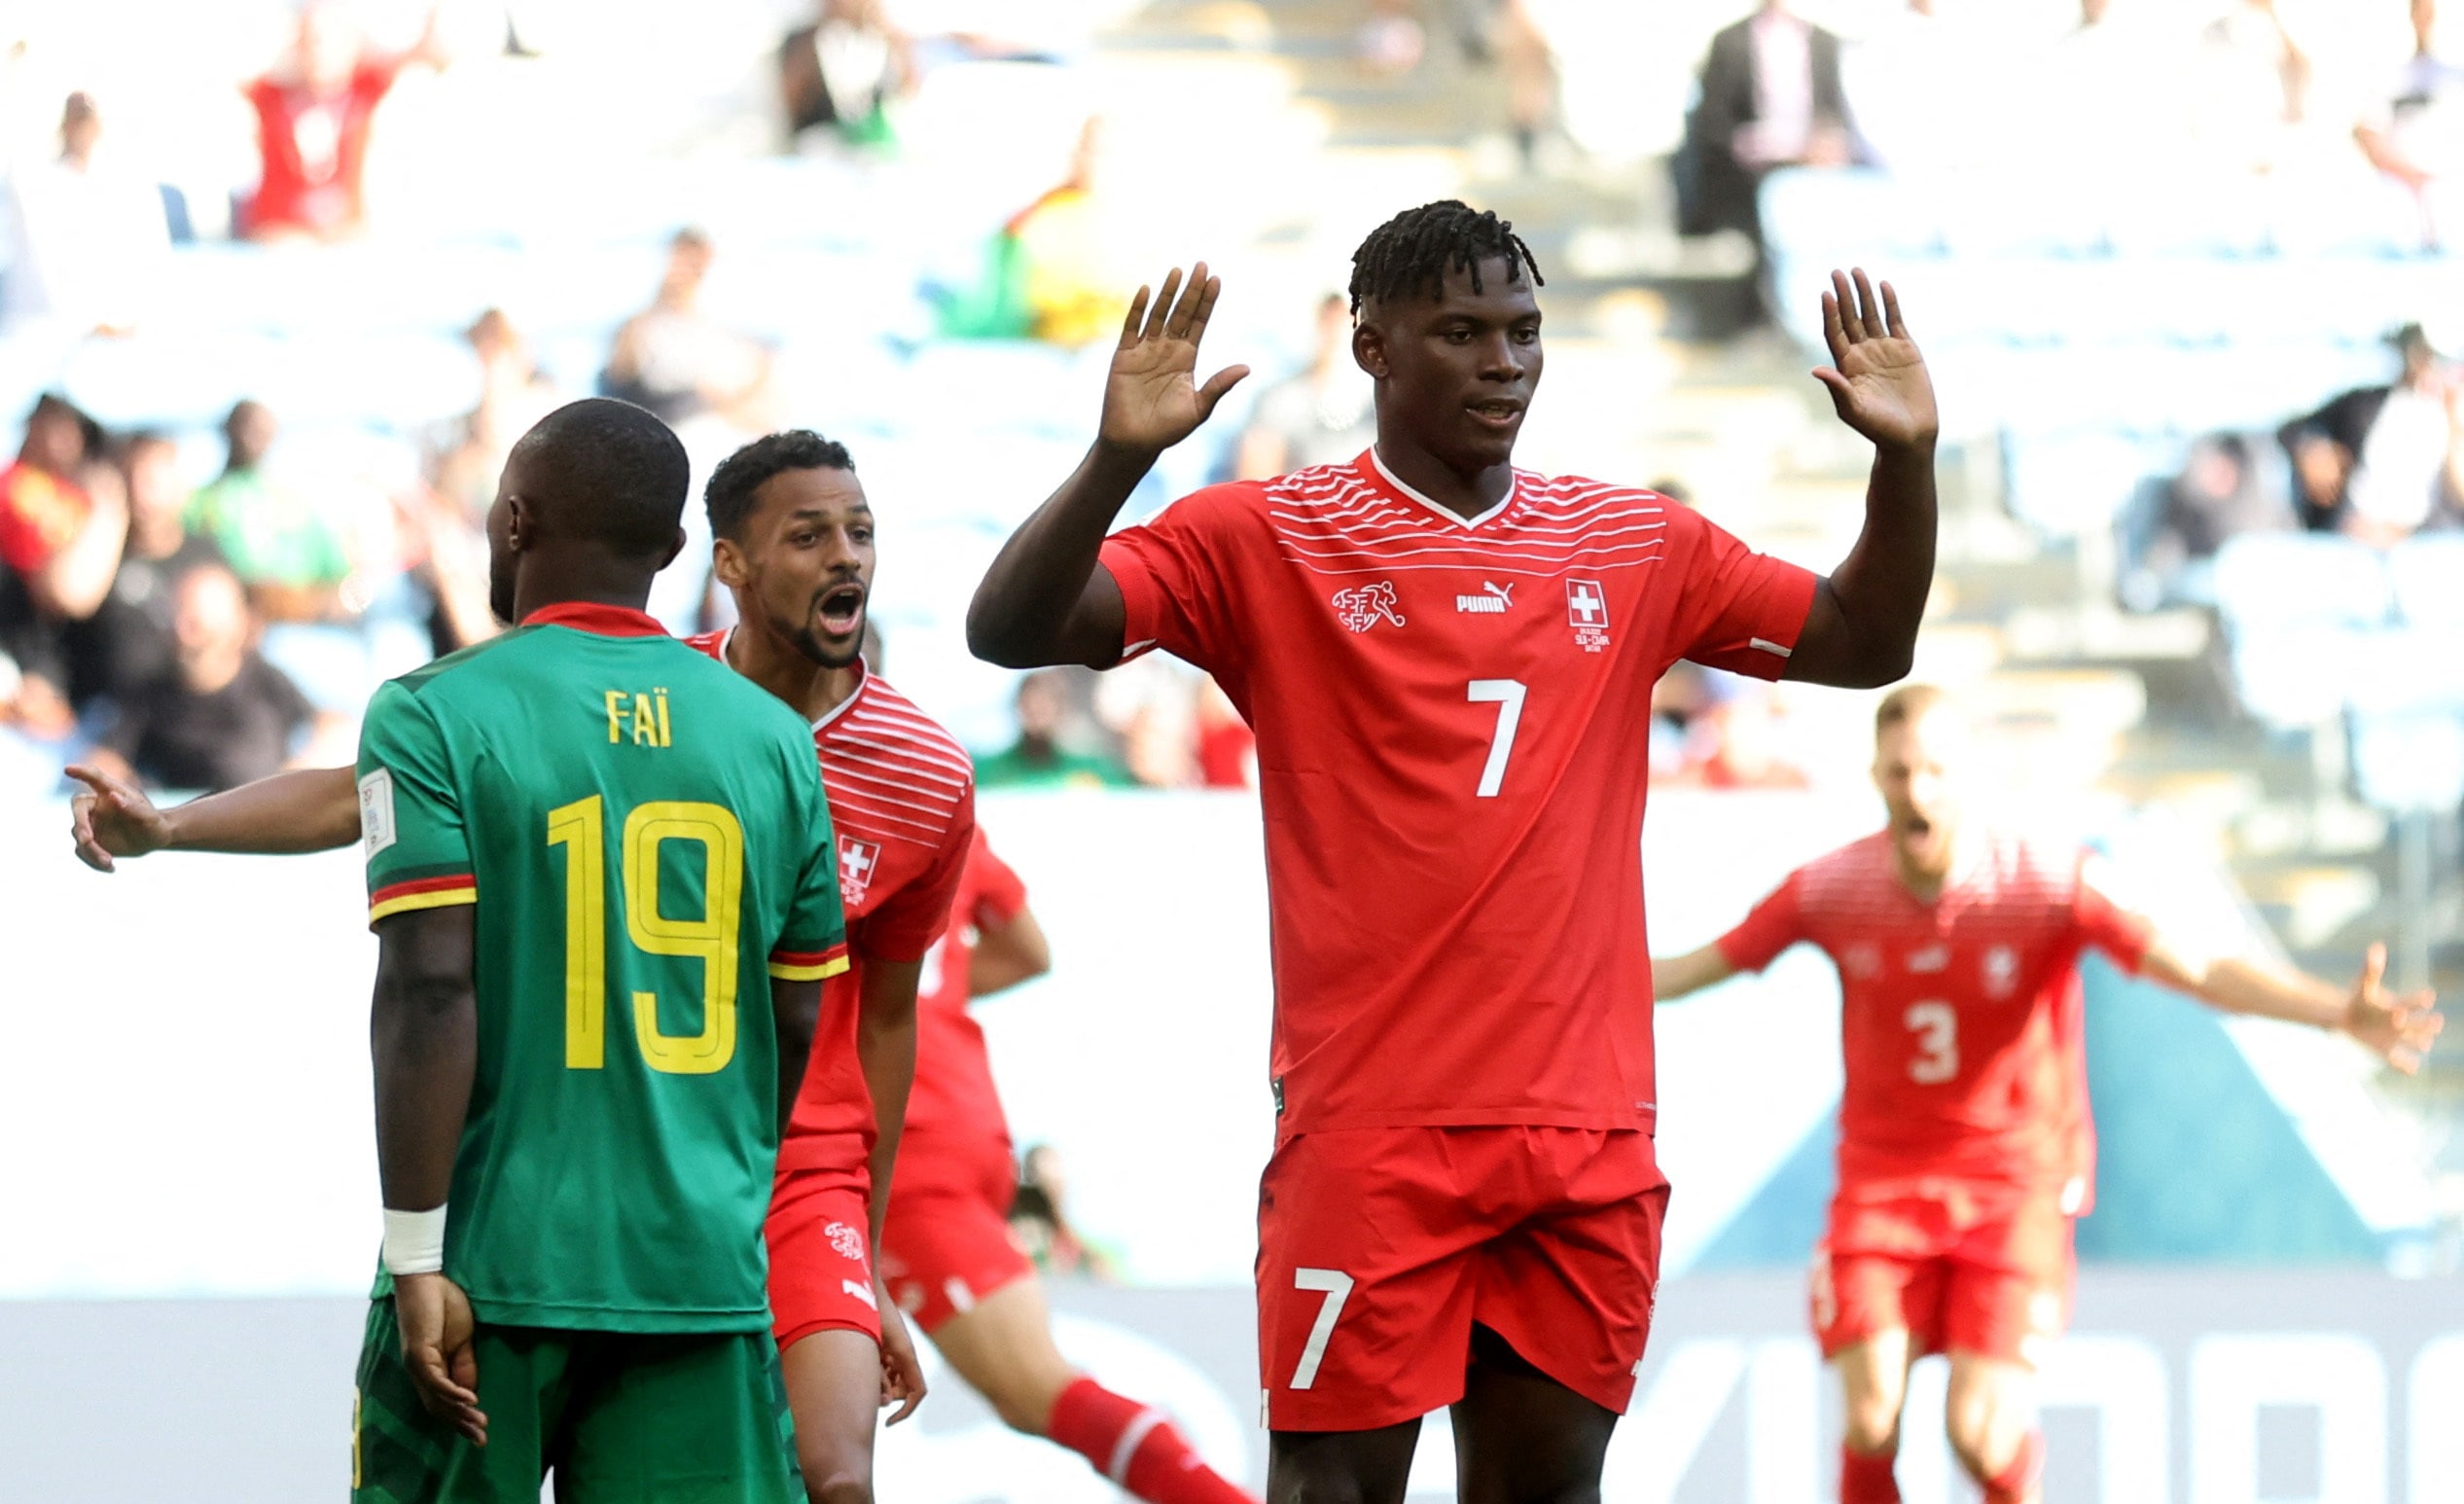 FIFA World Cup Switzerland vs Cameroon Highlights: Embolo helps SUI win 1-0